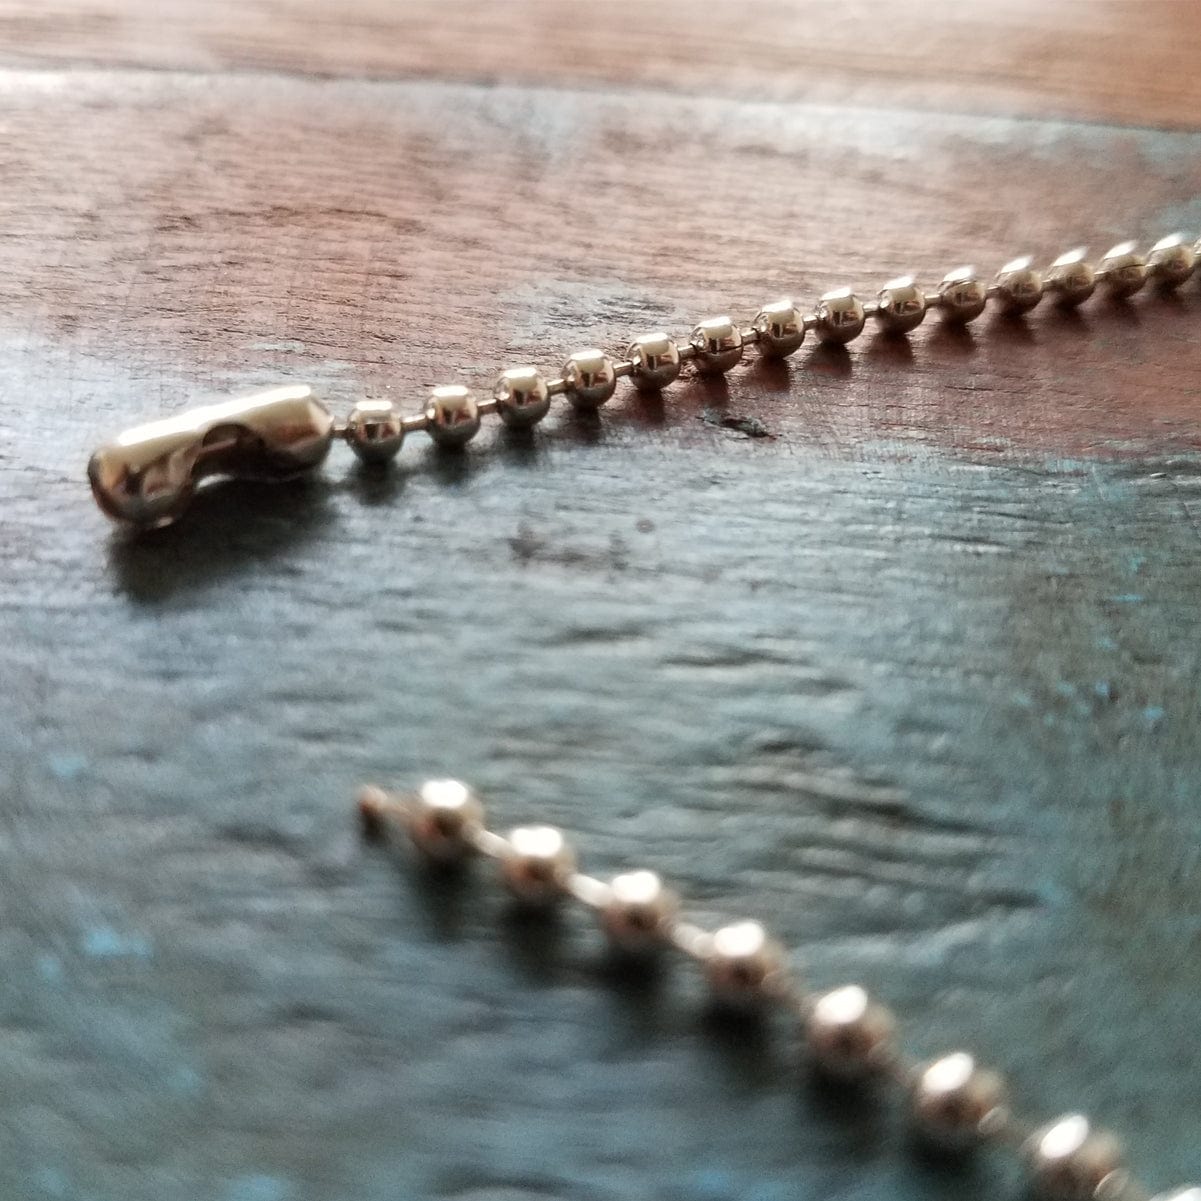 Nickel-Plated Steel Ball Chain, No 3 Bead Size